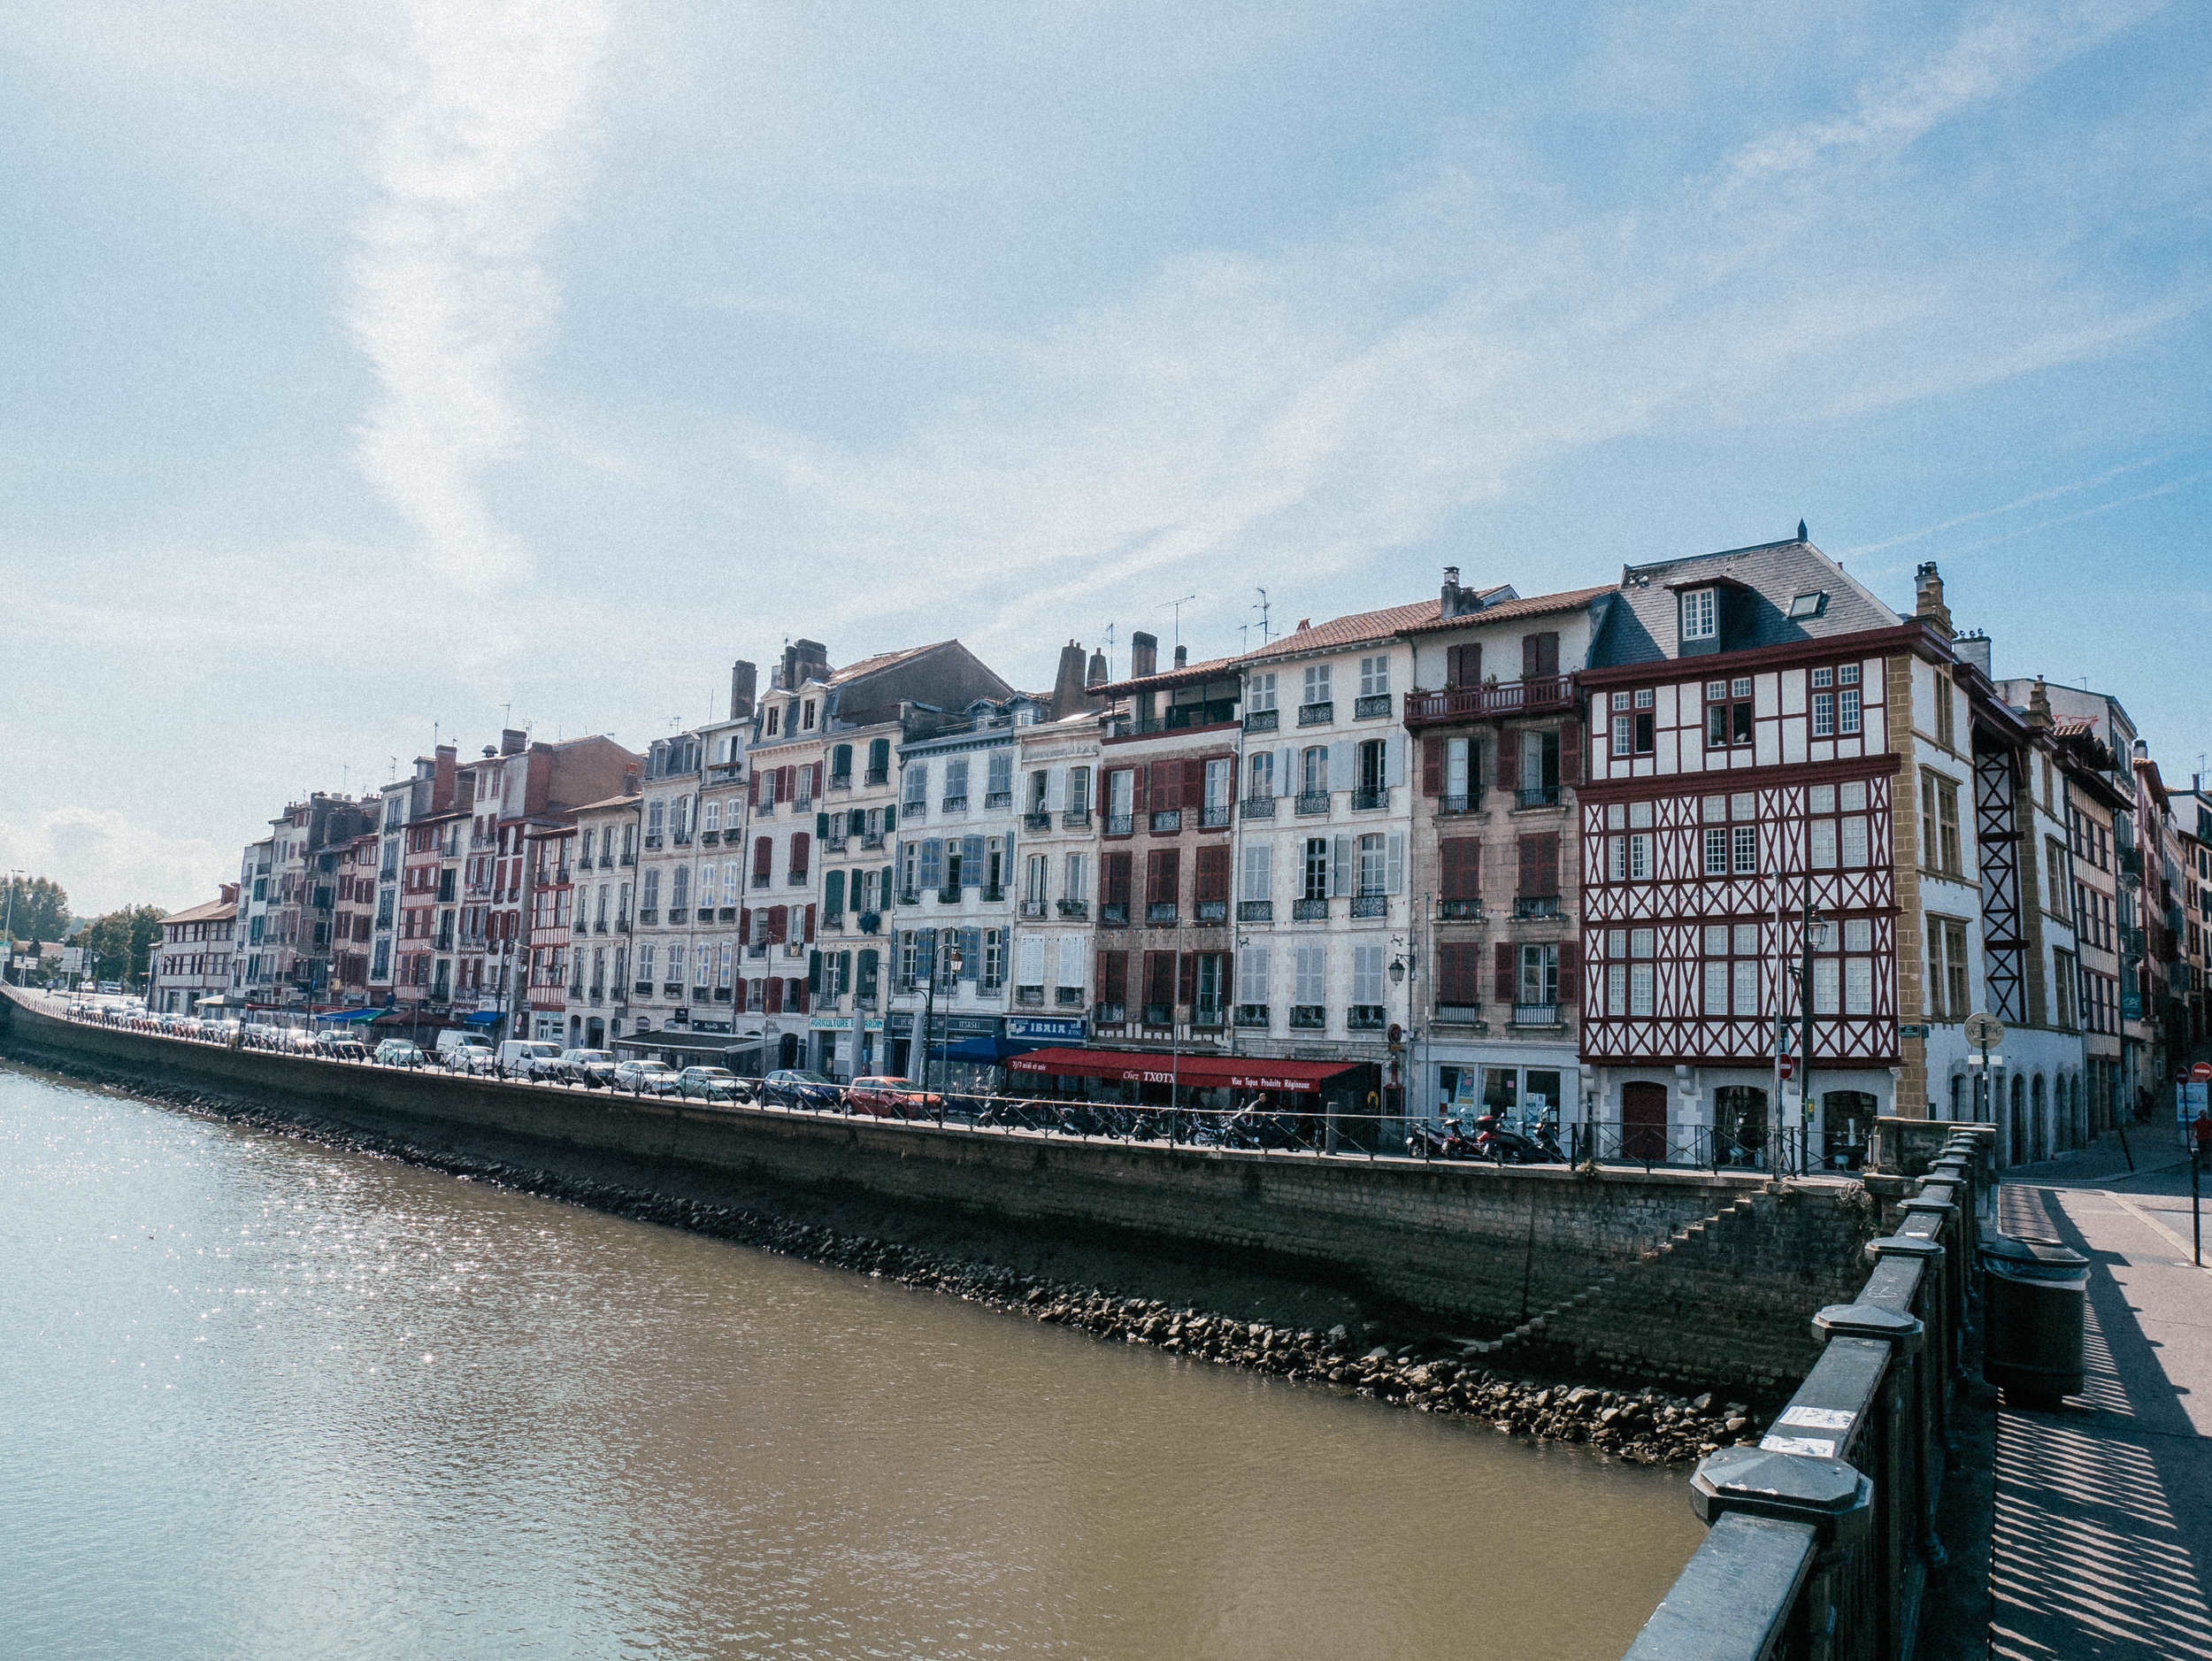 Along the river - Bayonne - Basque Country - France